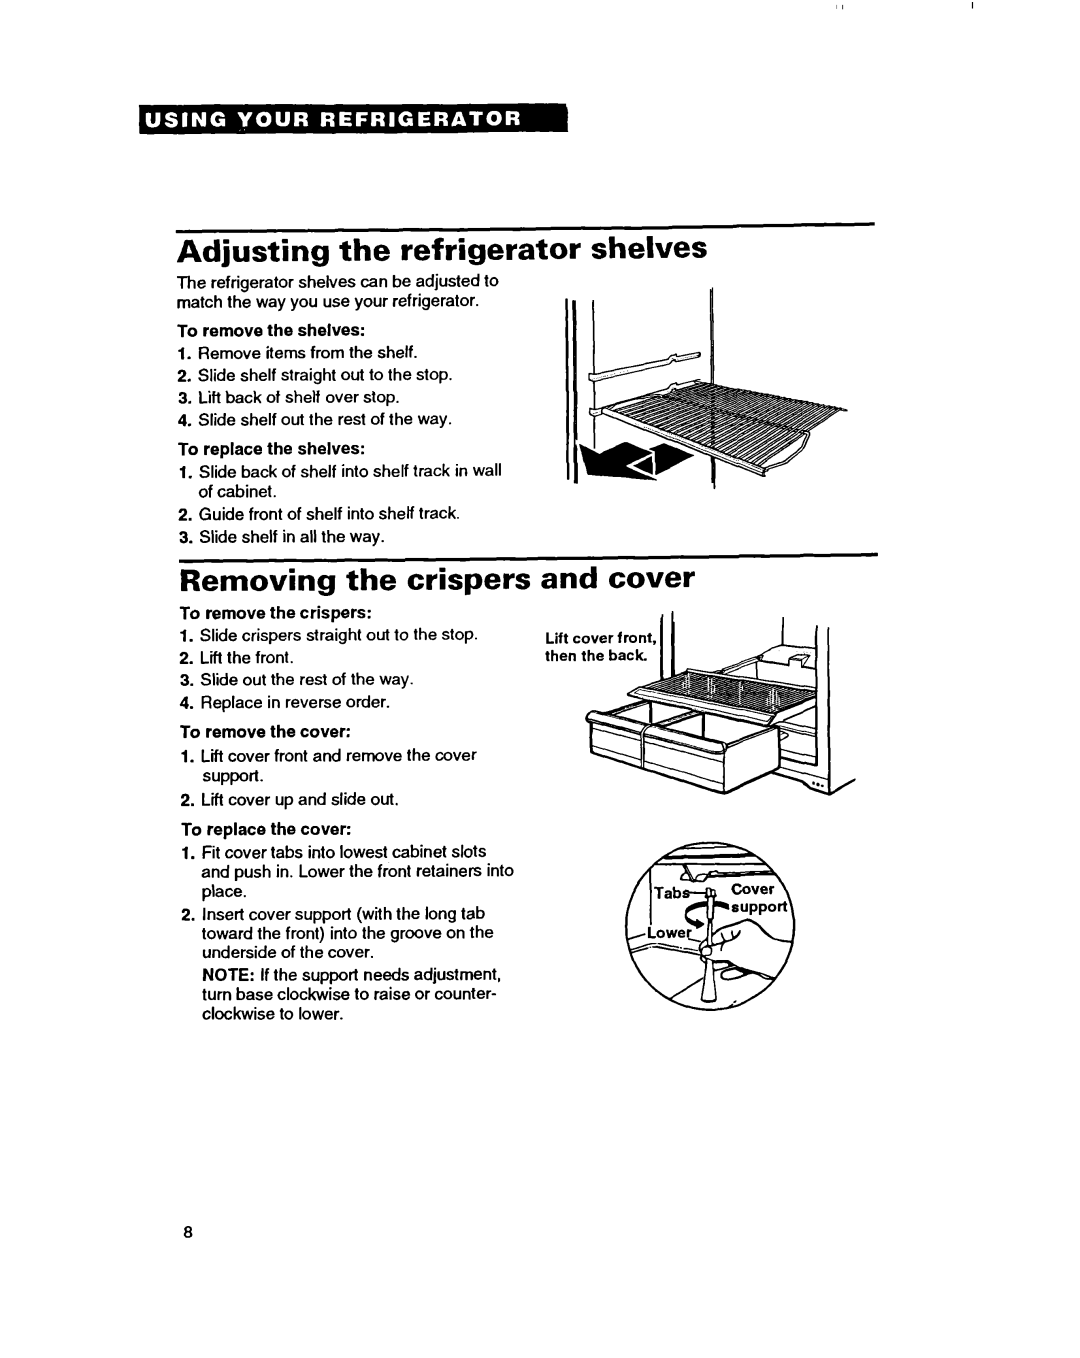 Whirlpool TT14DK, TT14HD important safety instructions Adjusting the refrigerator shelves, Removing the crispers, and cover 